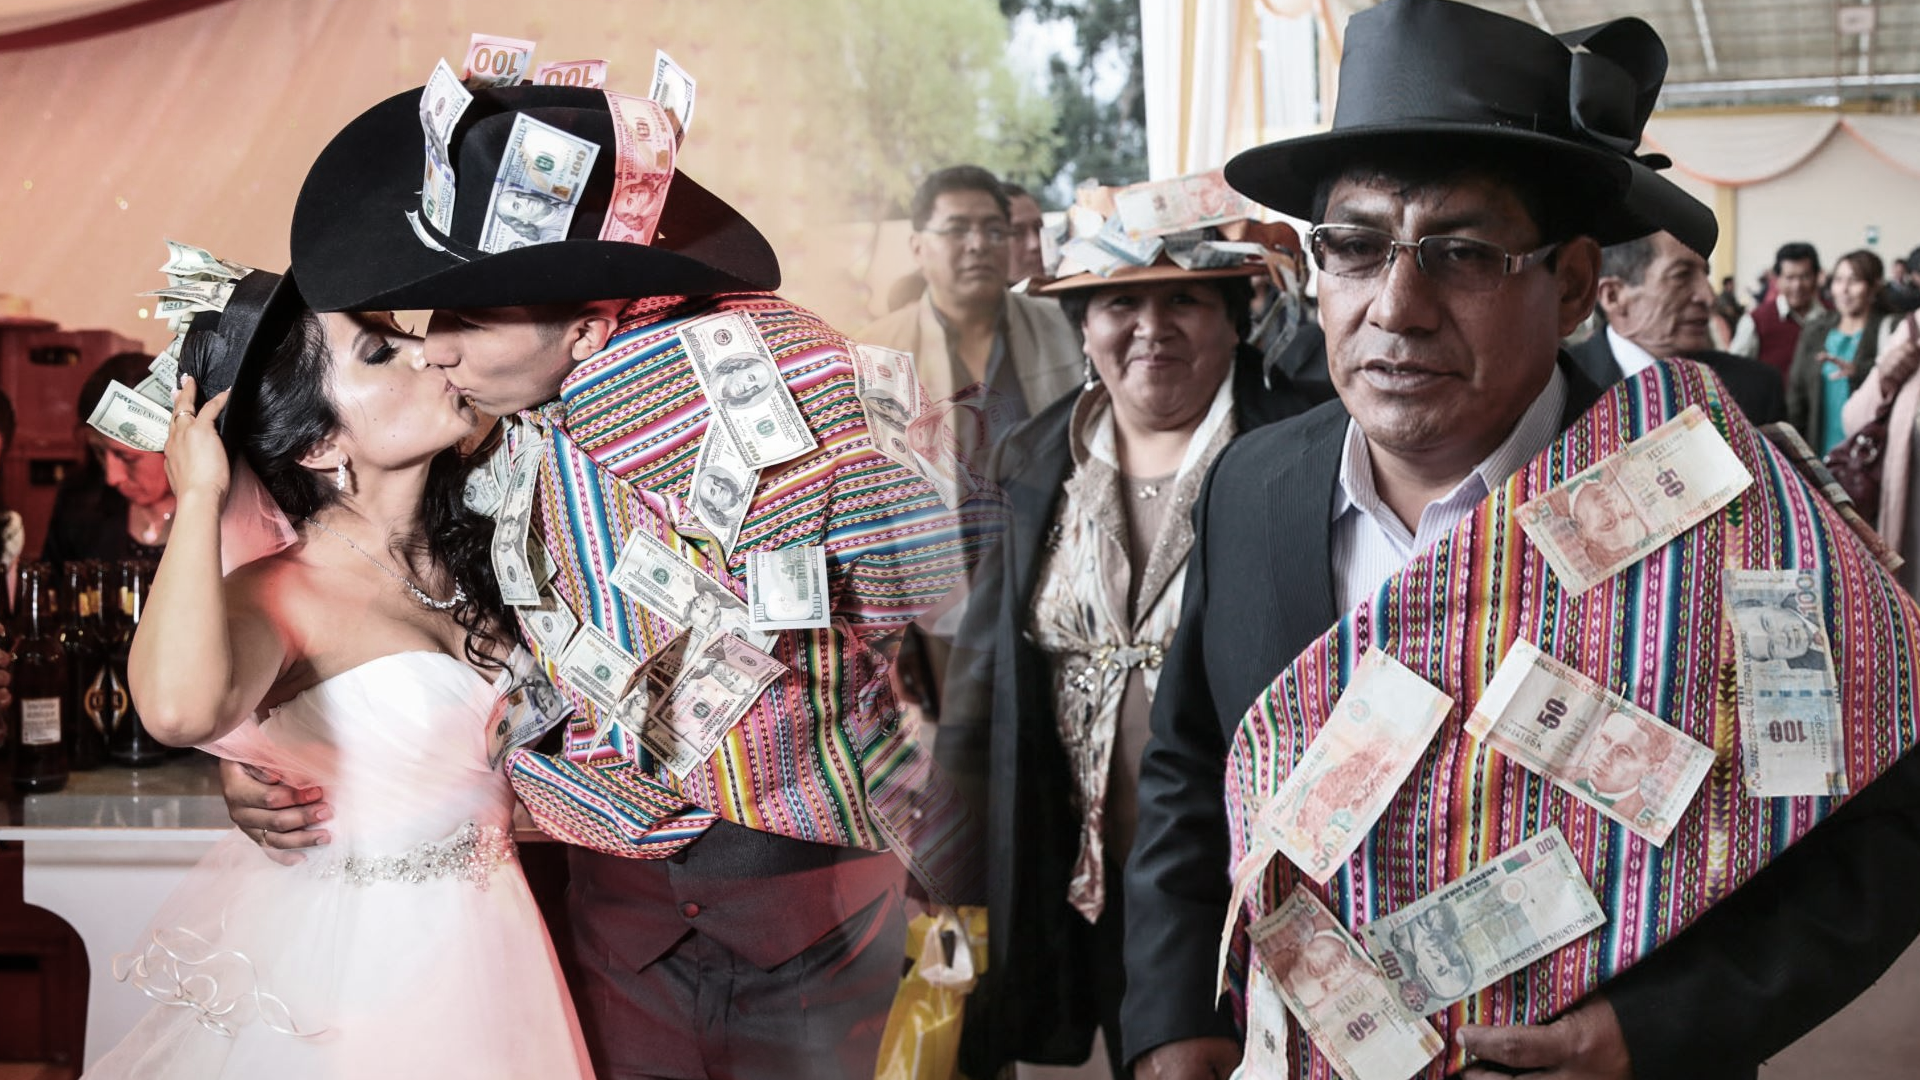 This is how love is celebrated in traditional Andean marriages.